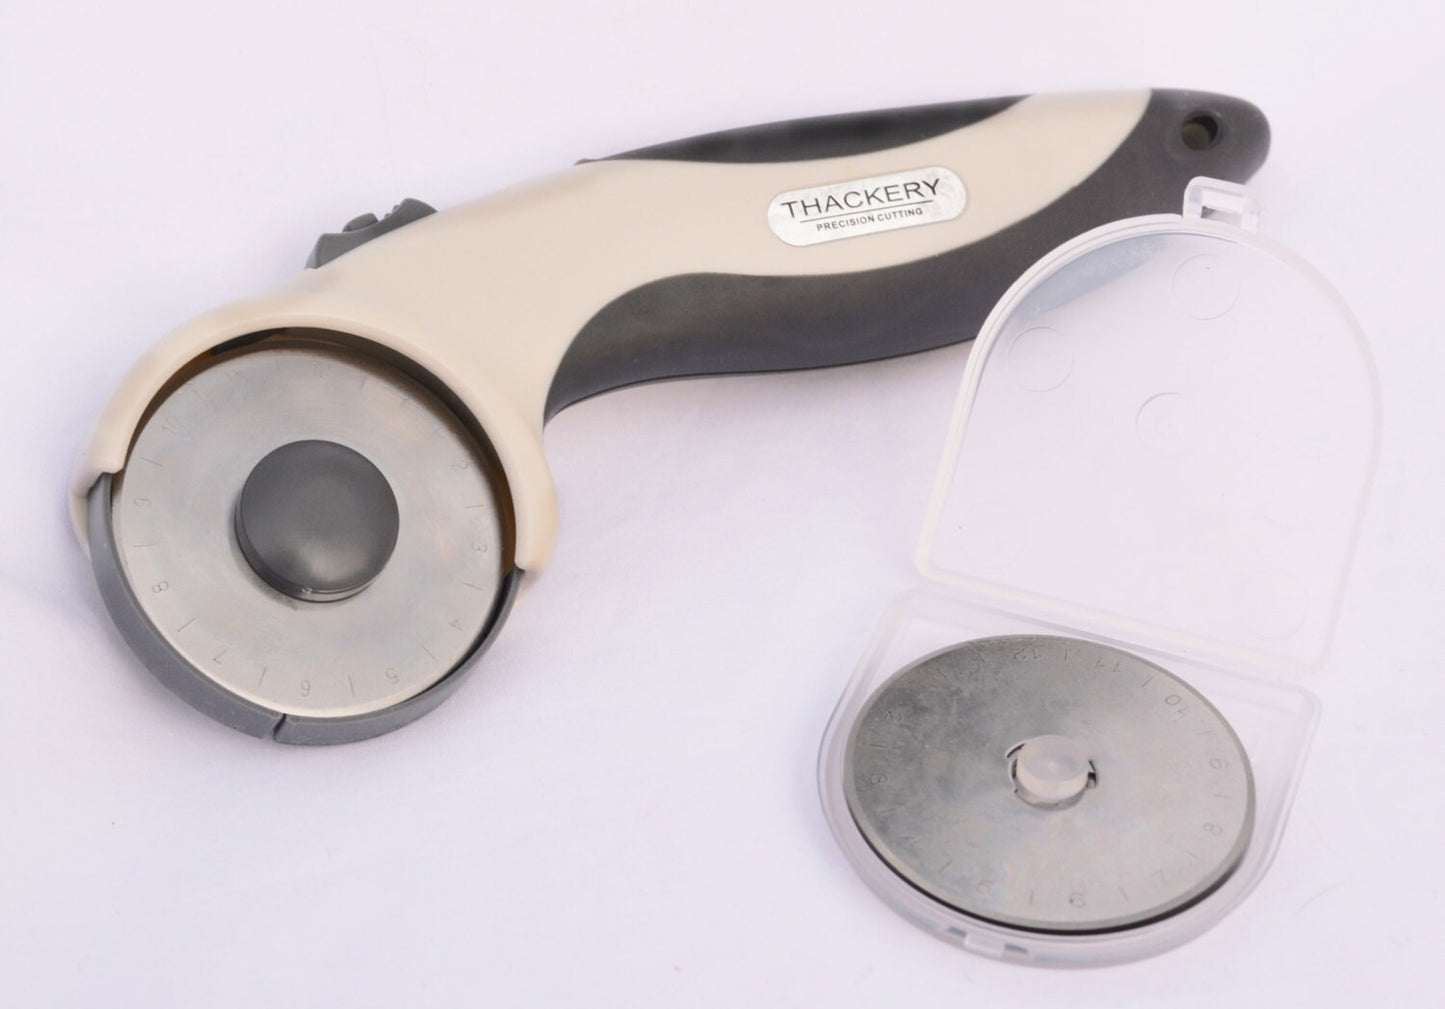 Thackery RC1-45C ROTARY CUTTER w/ 10 BLADES - uses 45mm Cutting Blades - ergonomic left or right handed!